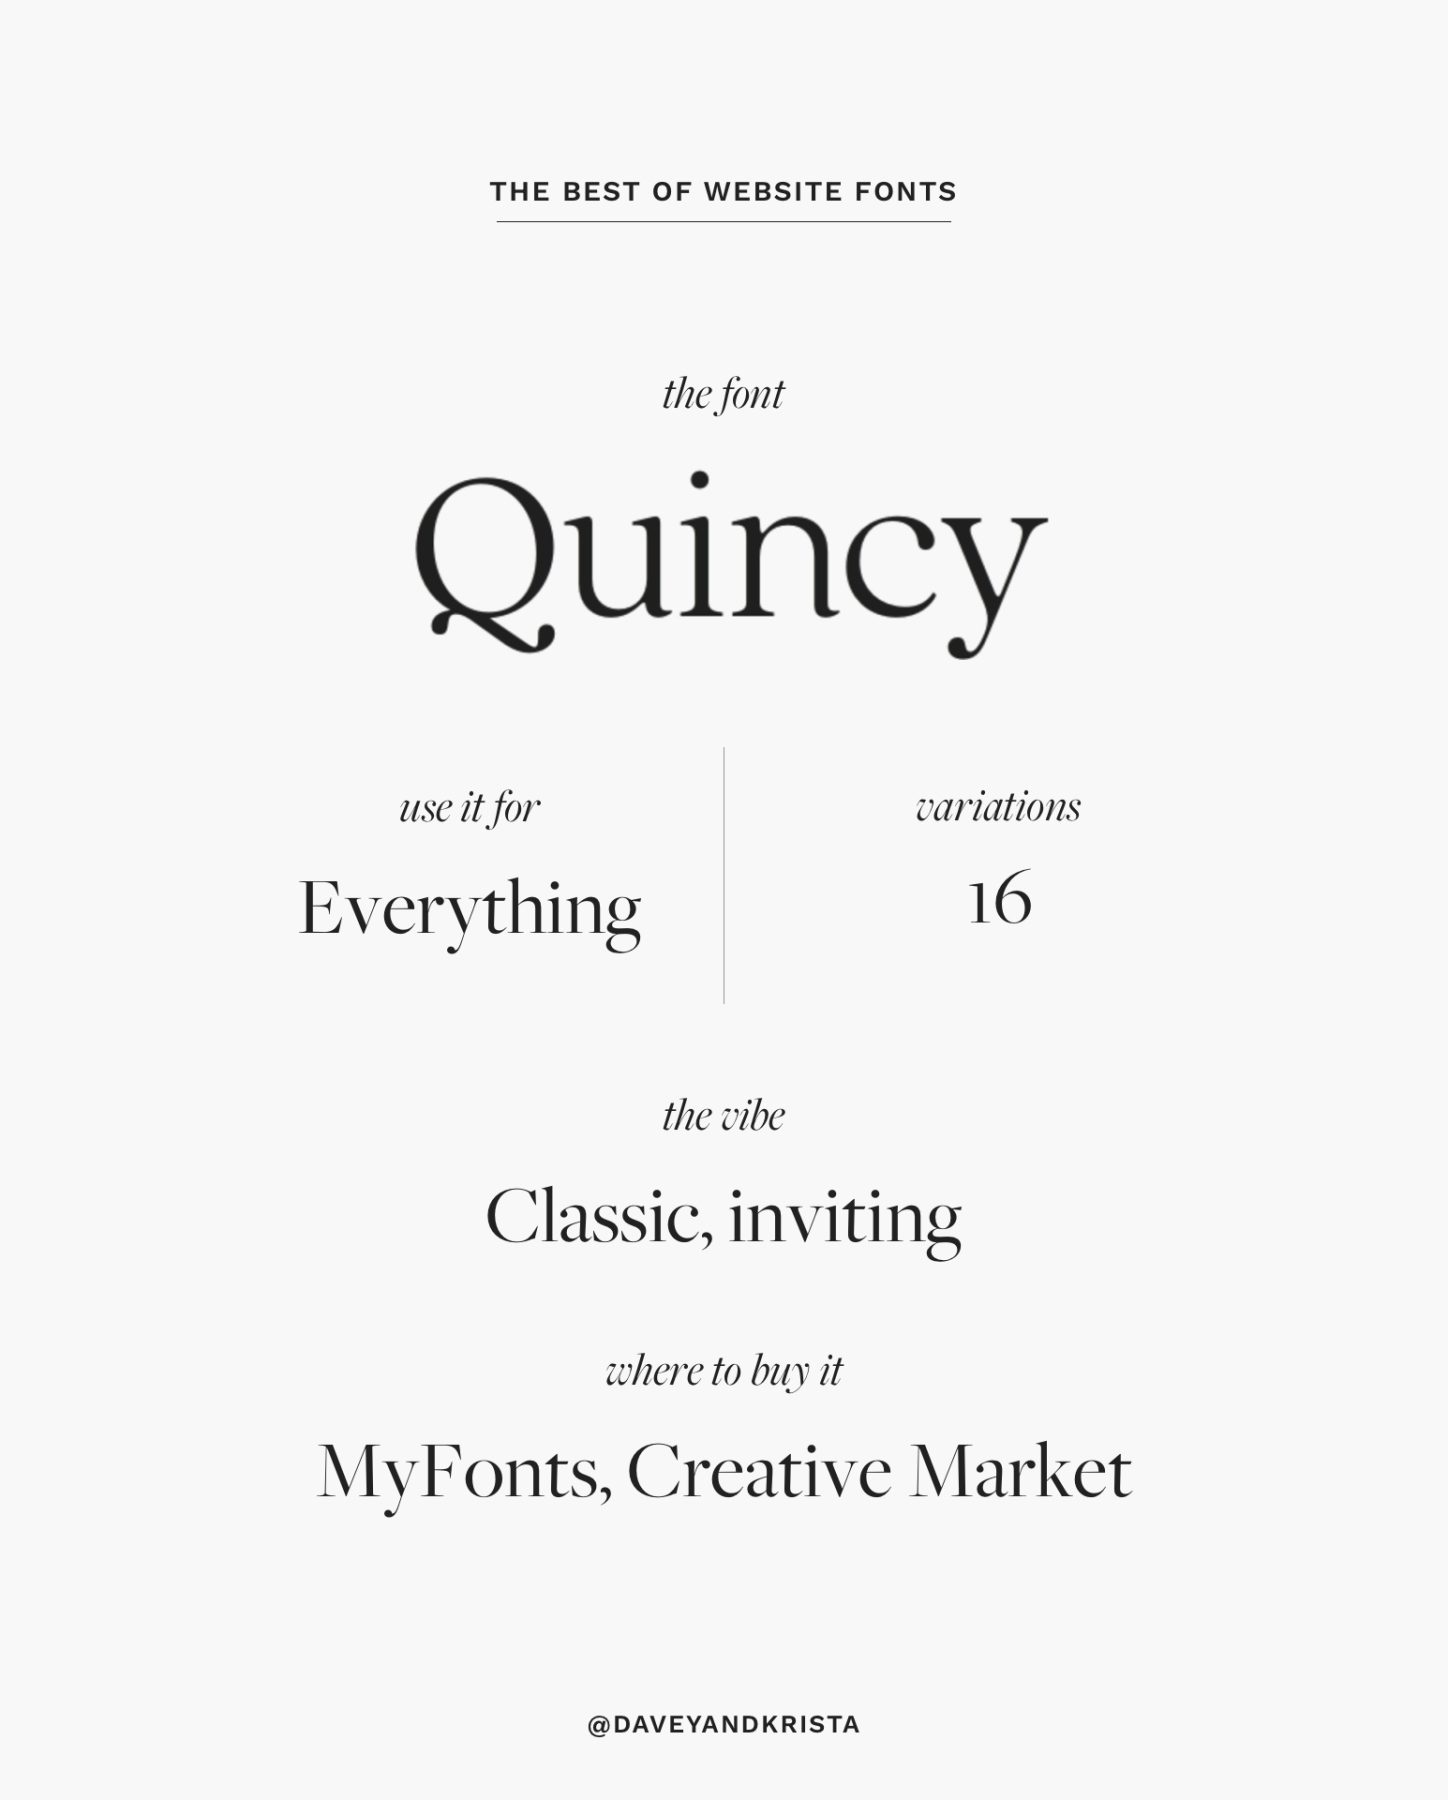 Quincy - a classic, inviting serif font | The Best Fonts for Websites